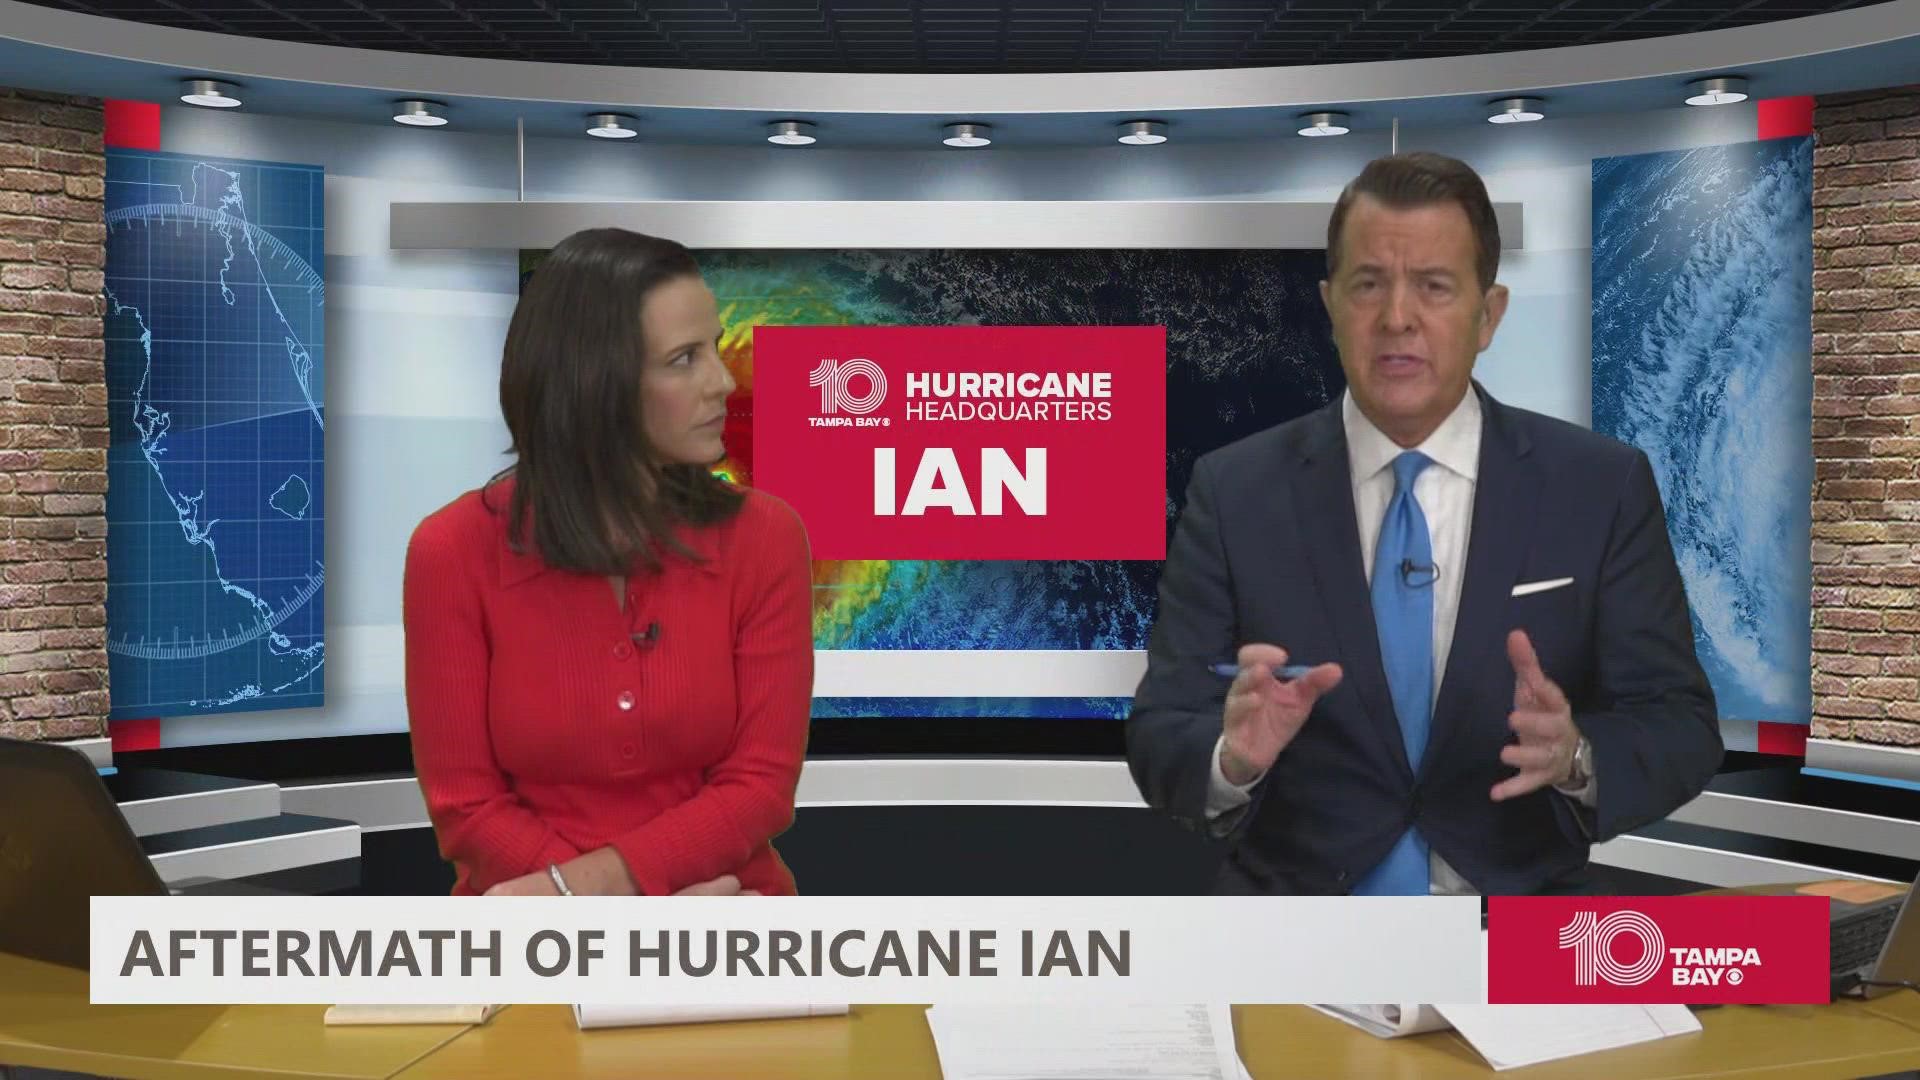 AAA anticipates a massive amount of claims due to Hurricane Ian's widespread flooding and wind damage.